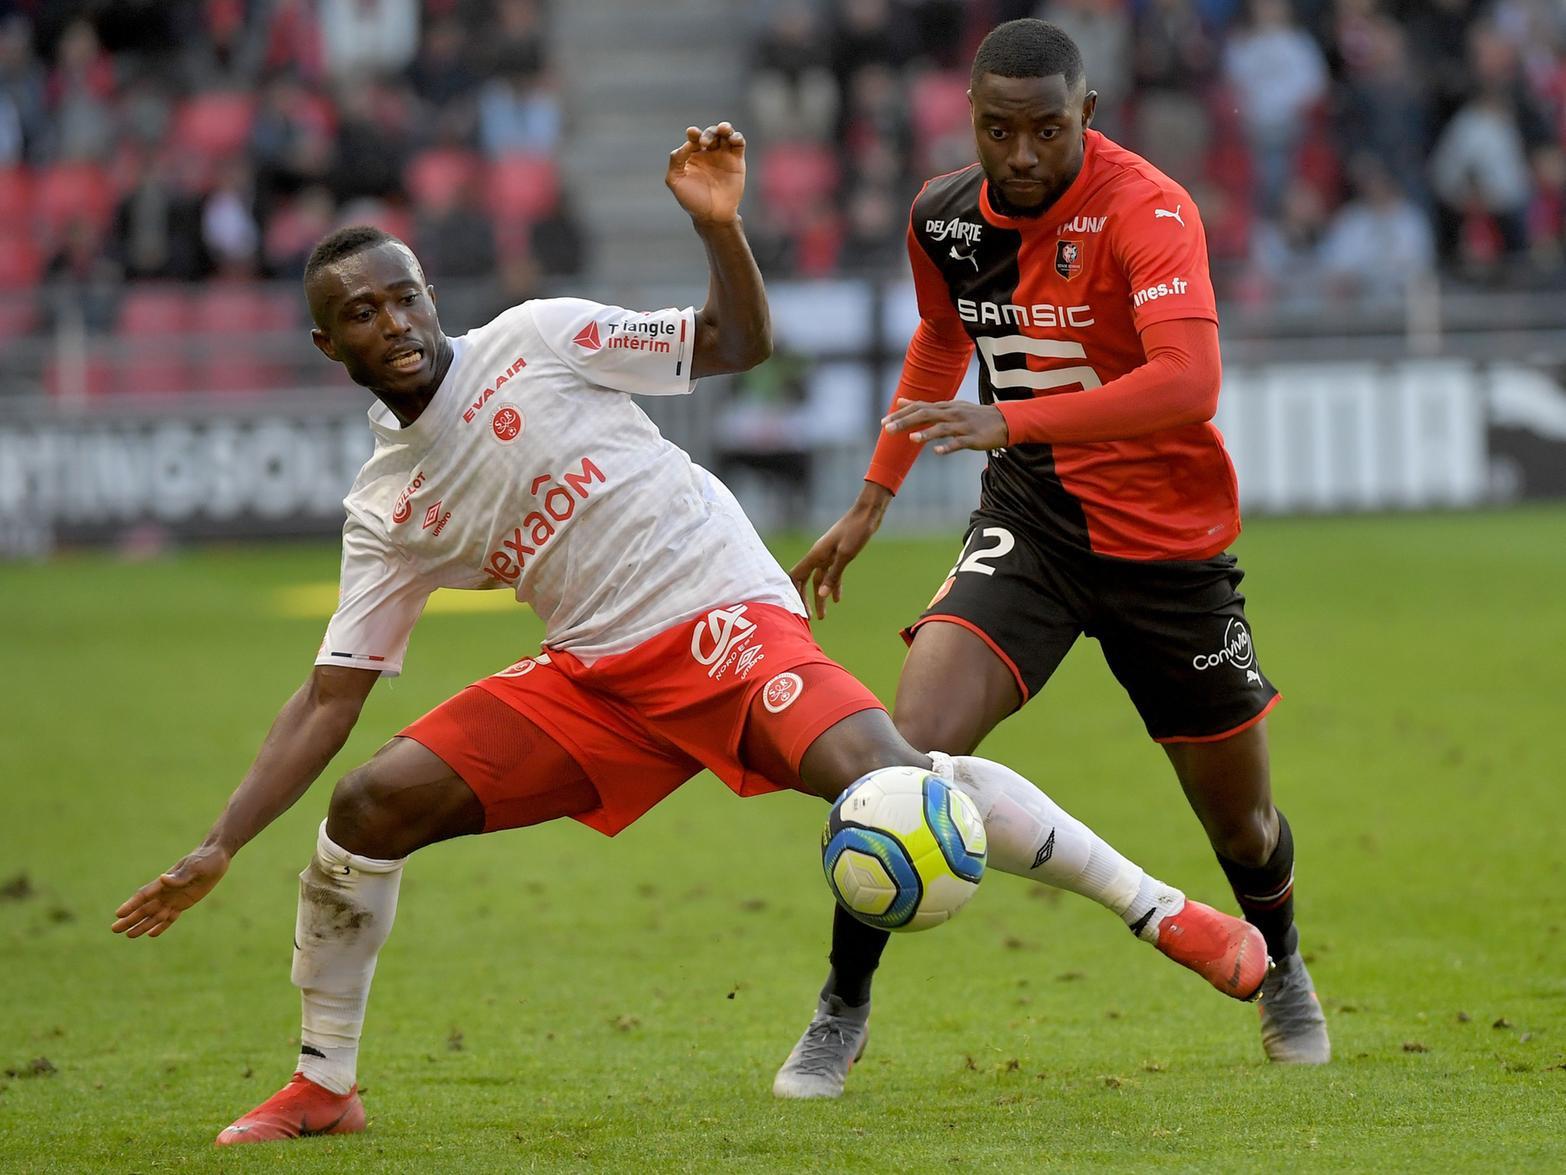 The Ivory Coast international has excellent in Ligue 1 since recovering from a brutal back injury, and was part of a spirited defence that kept Paris Saint-Germain out back in September